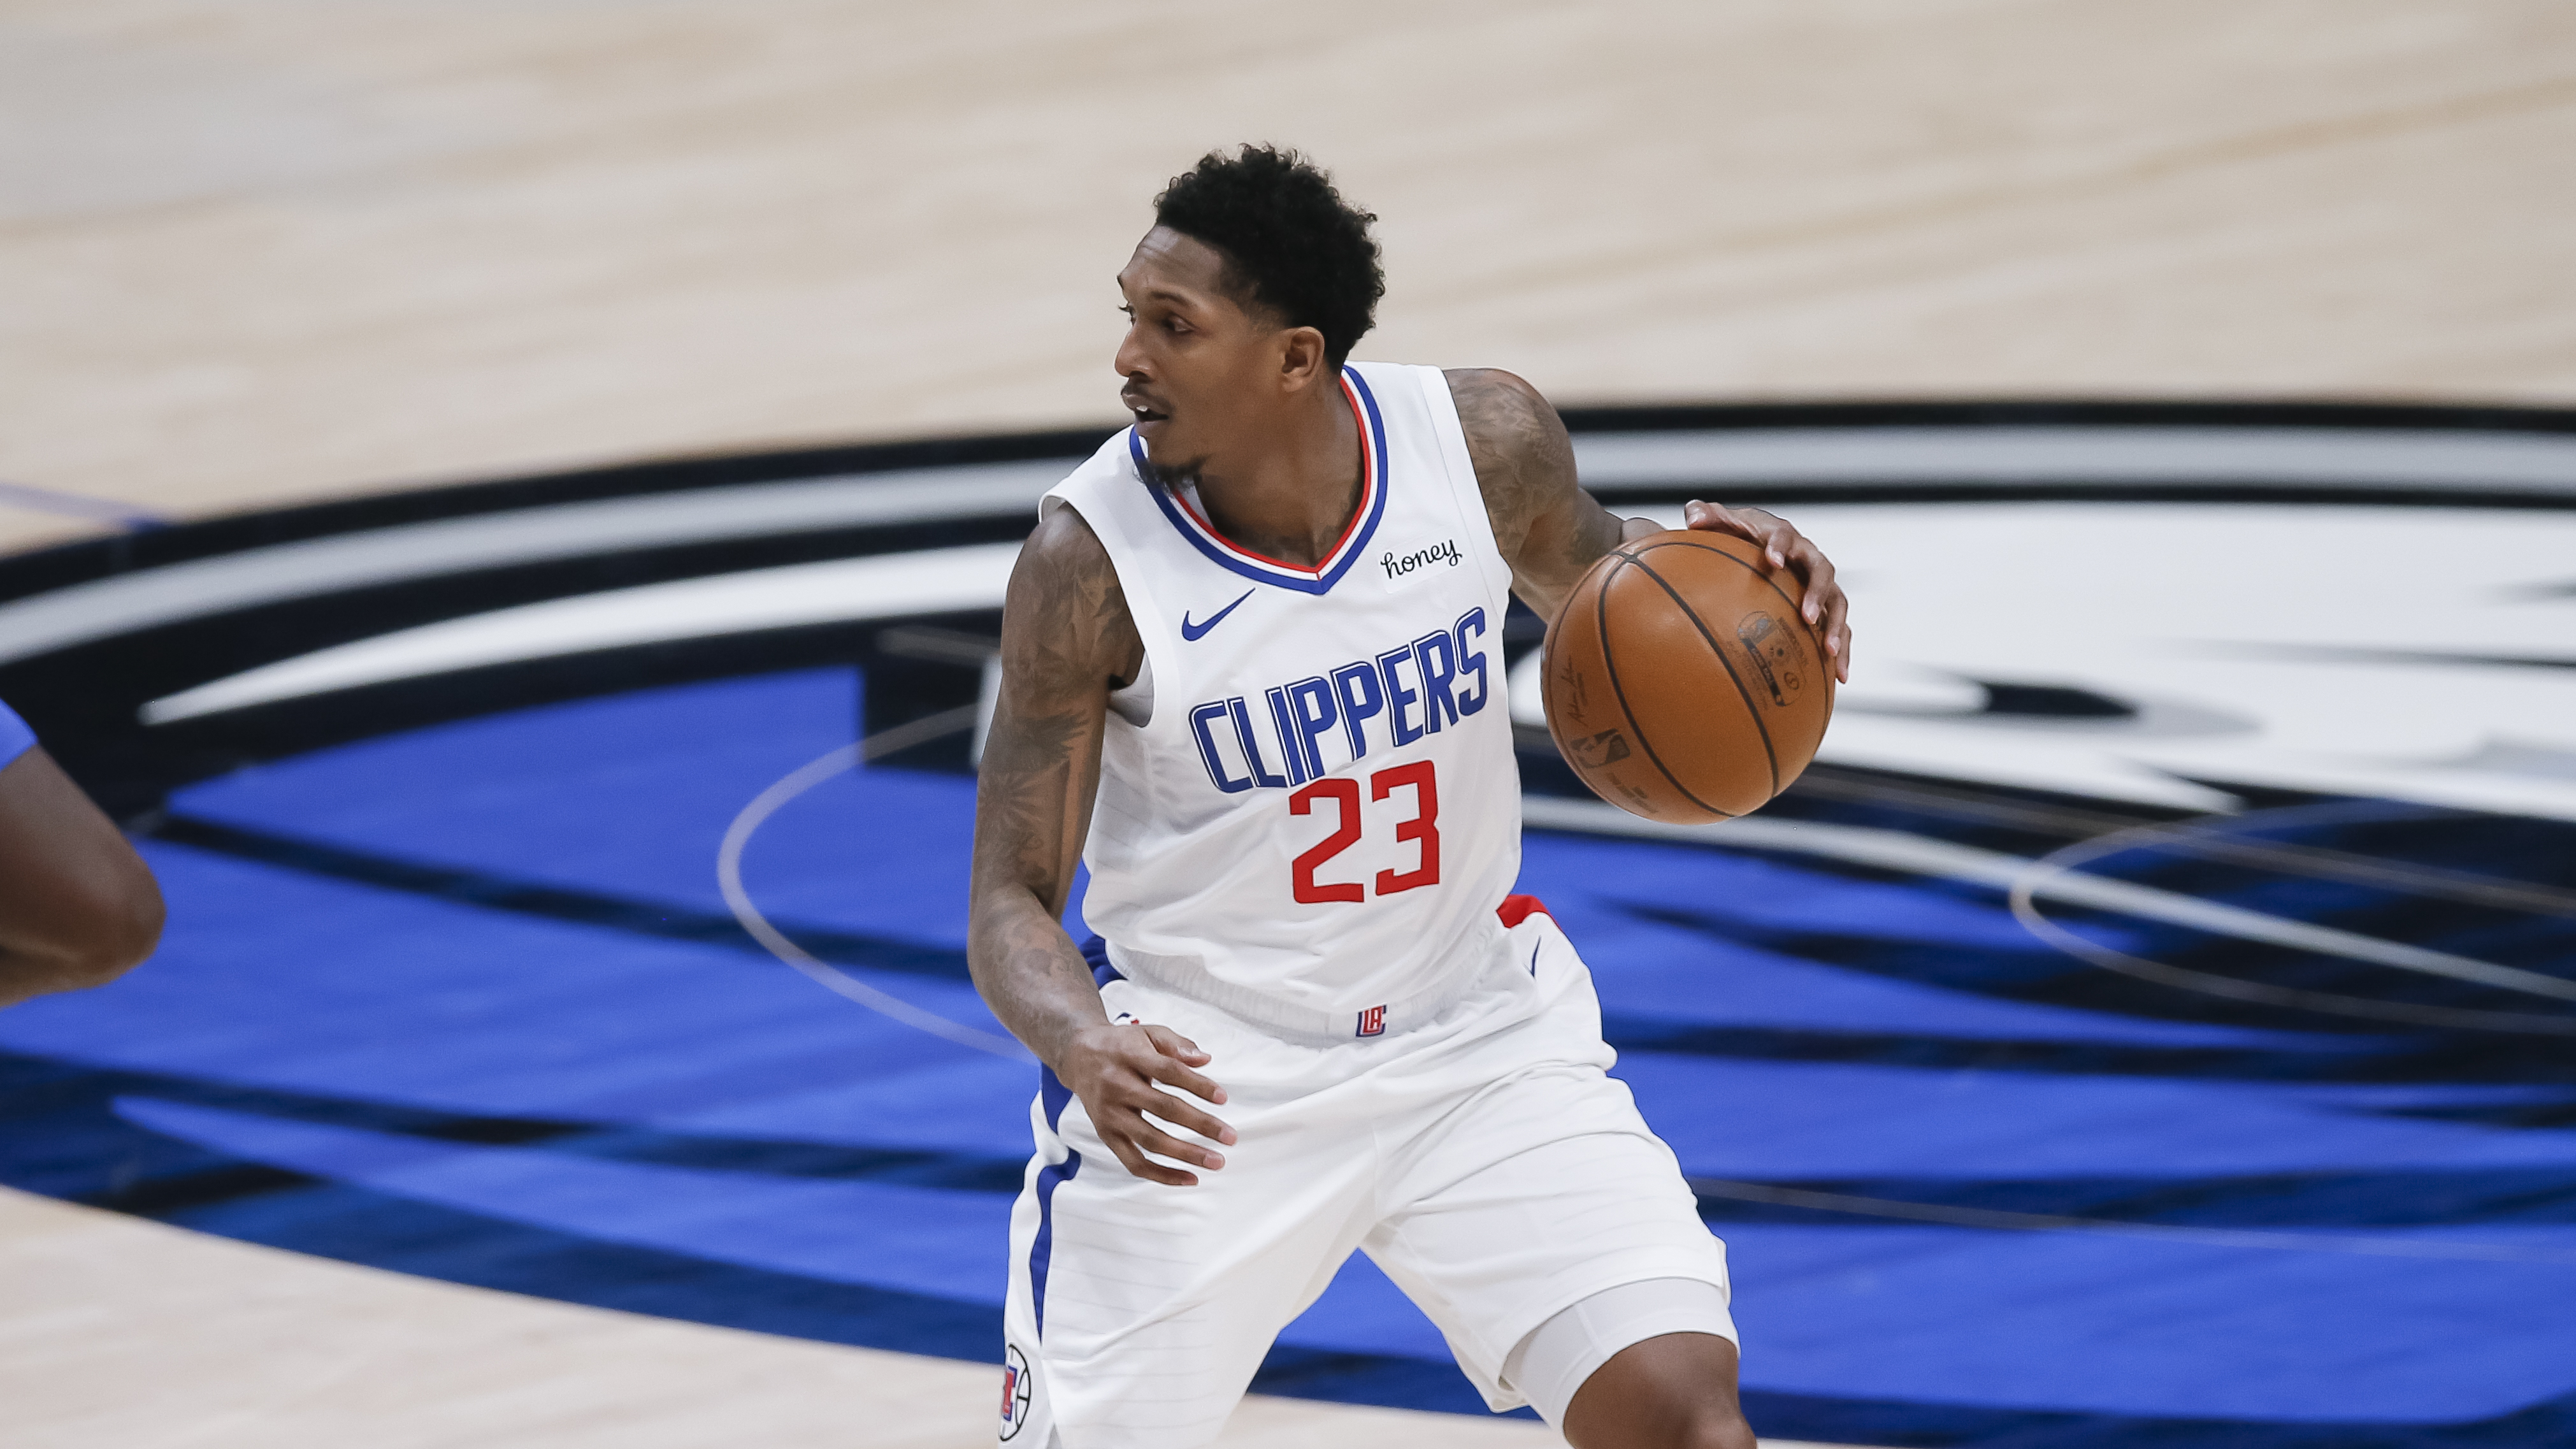 Lou Williams announced his retirement from the NBA